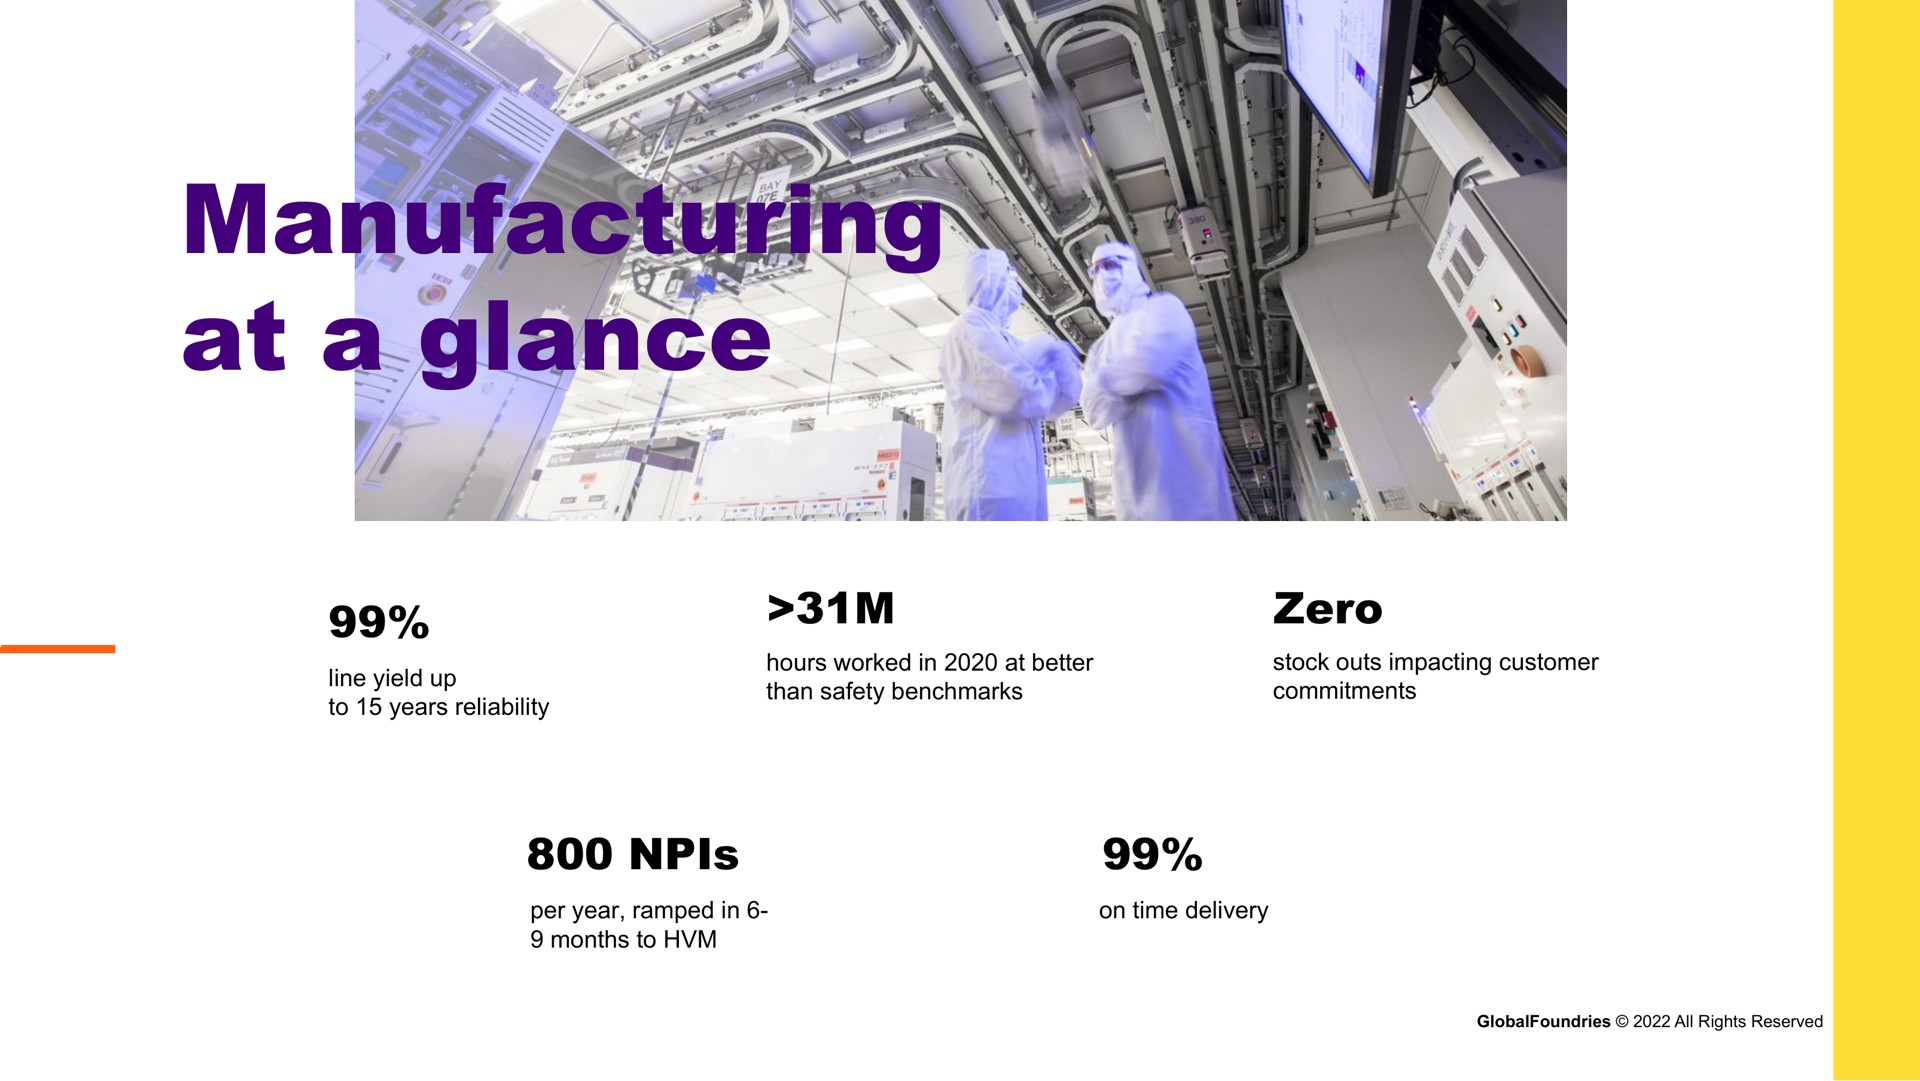 manufacturing at a glance | GlobalFoundries